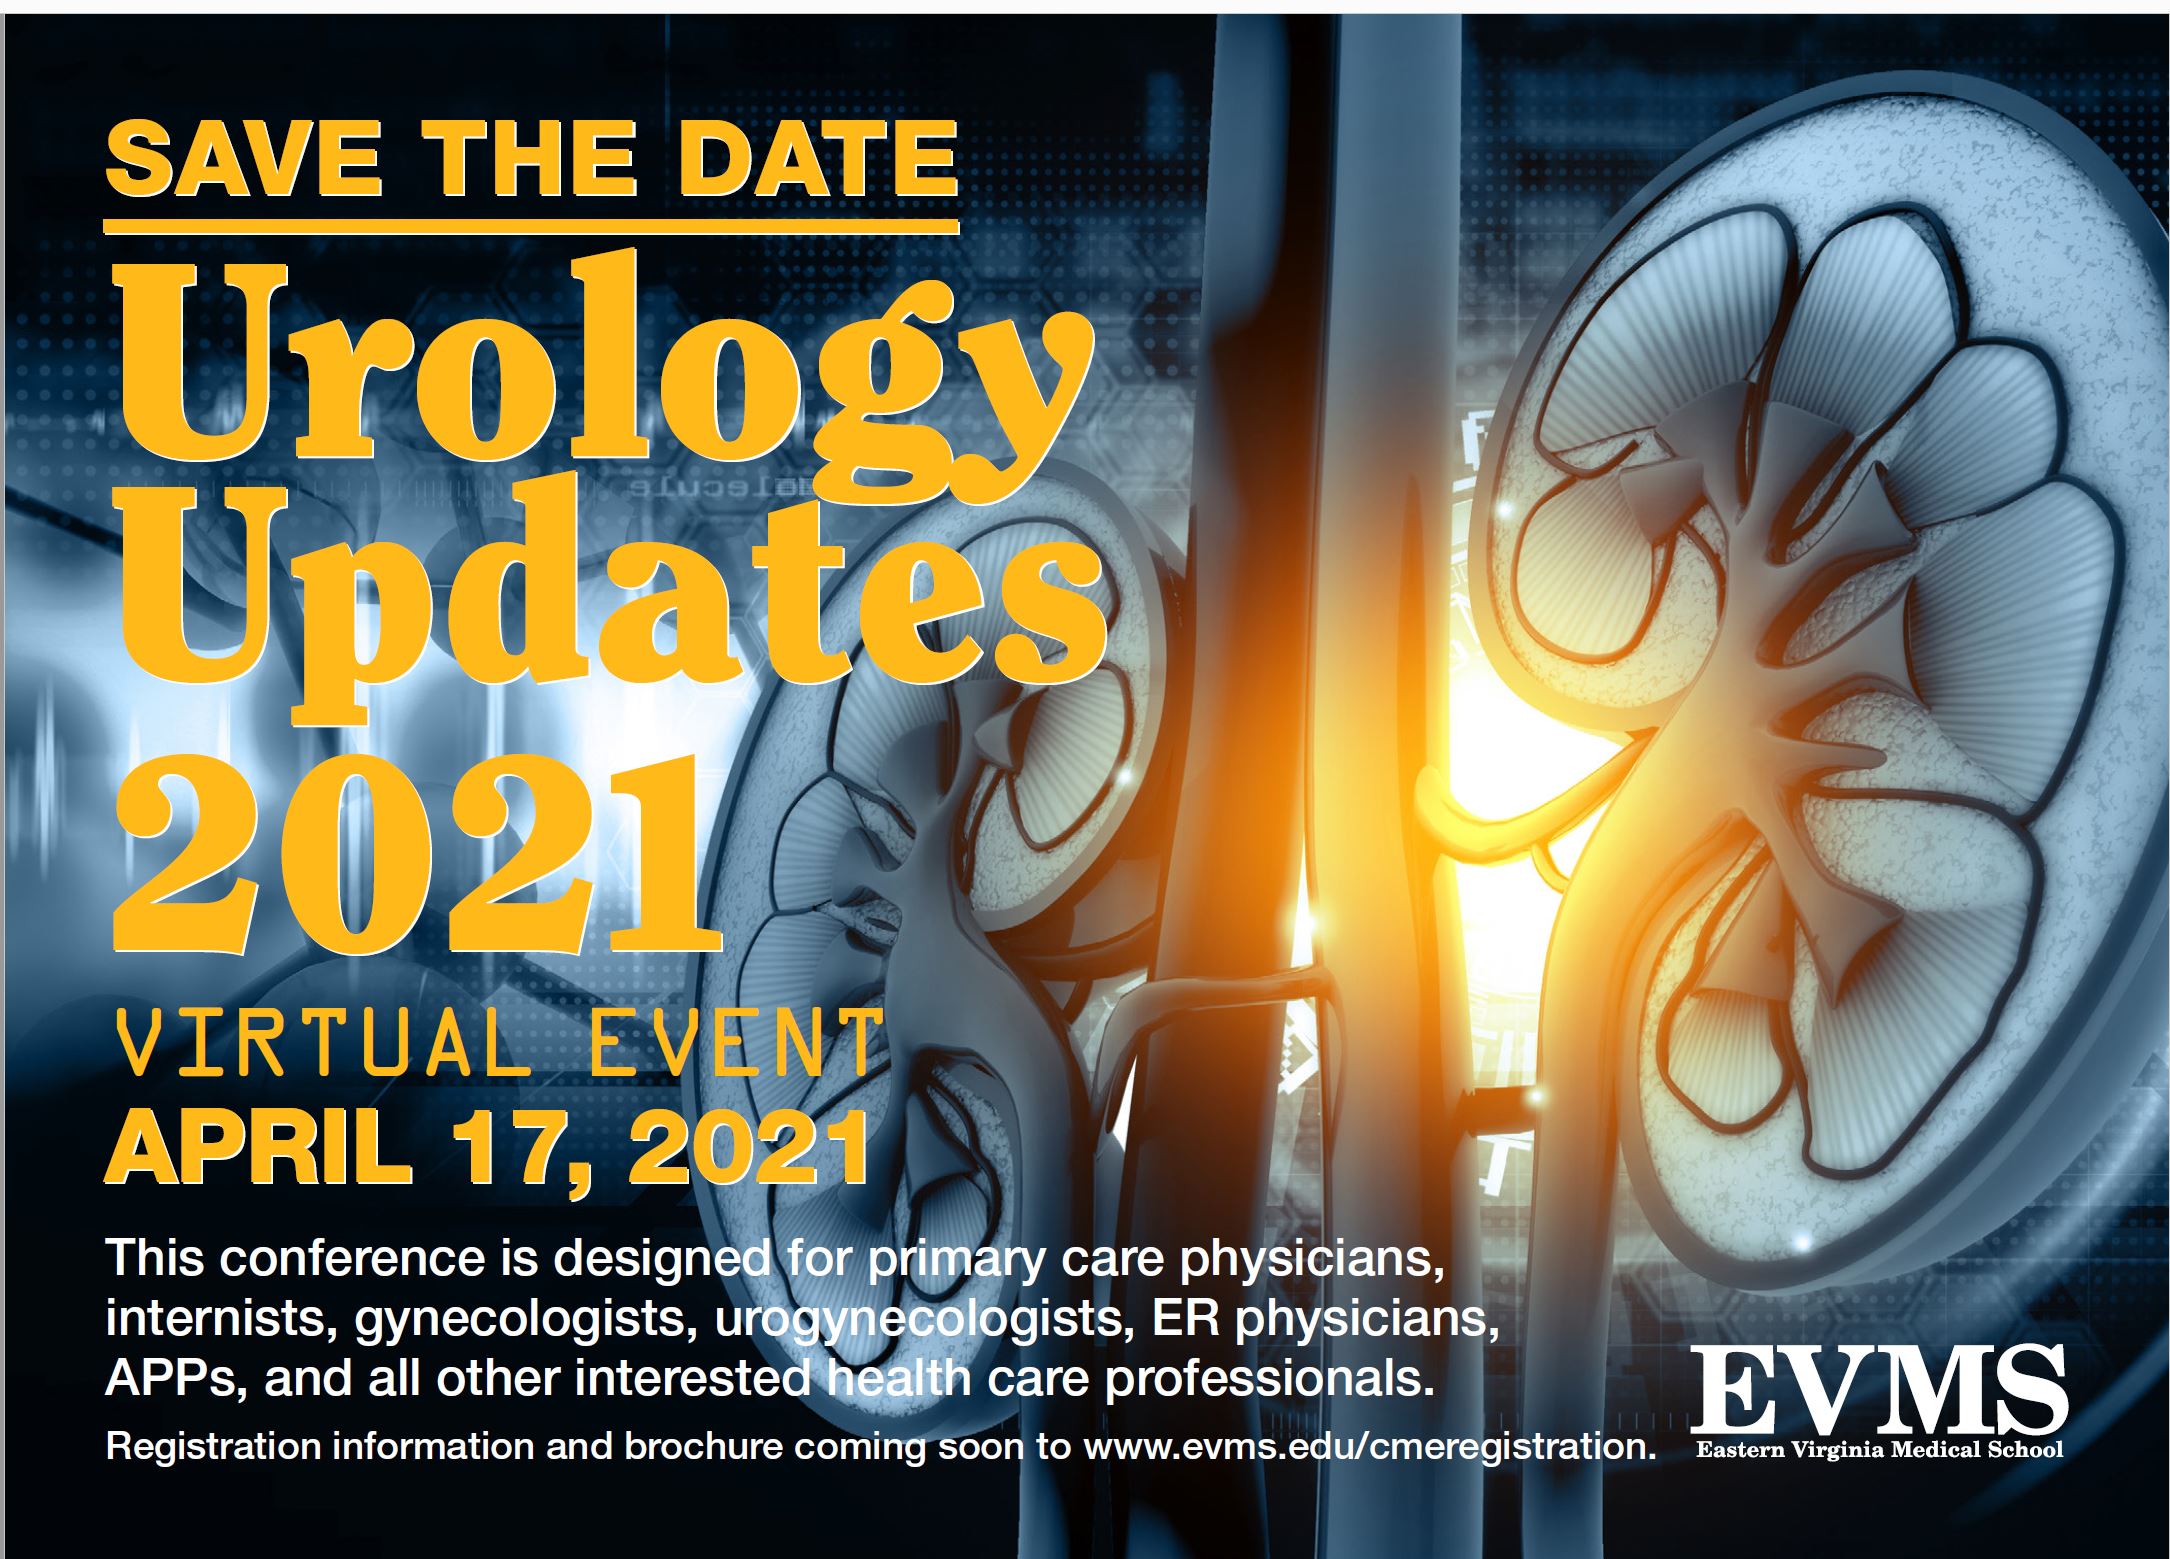 Save The Date - Virtual Event